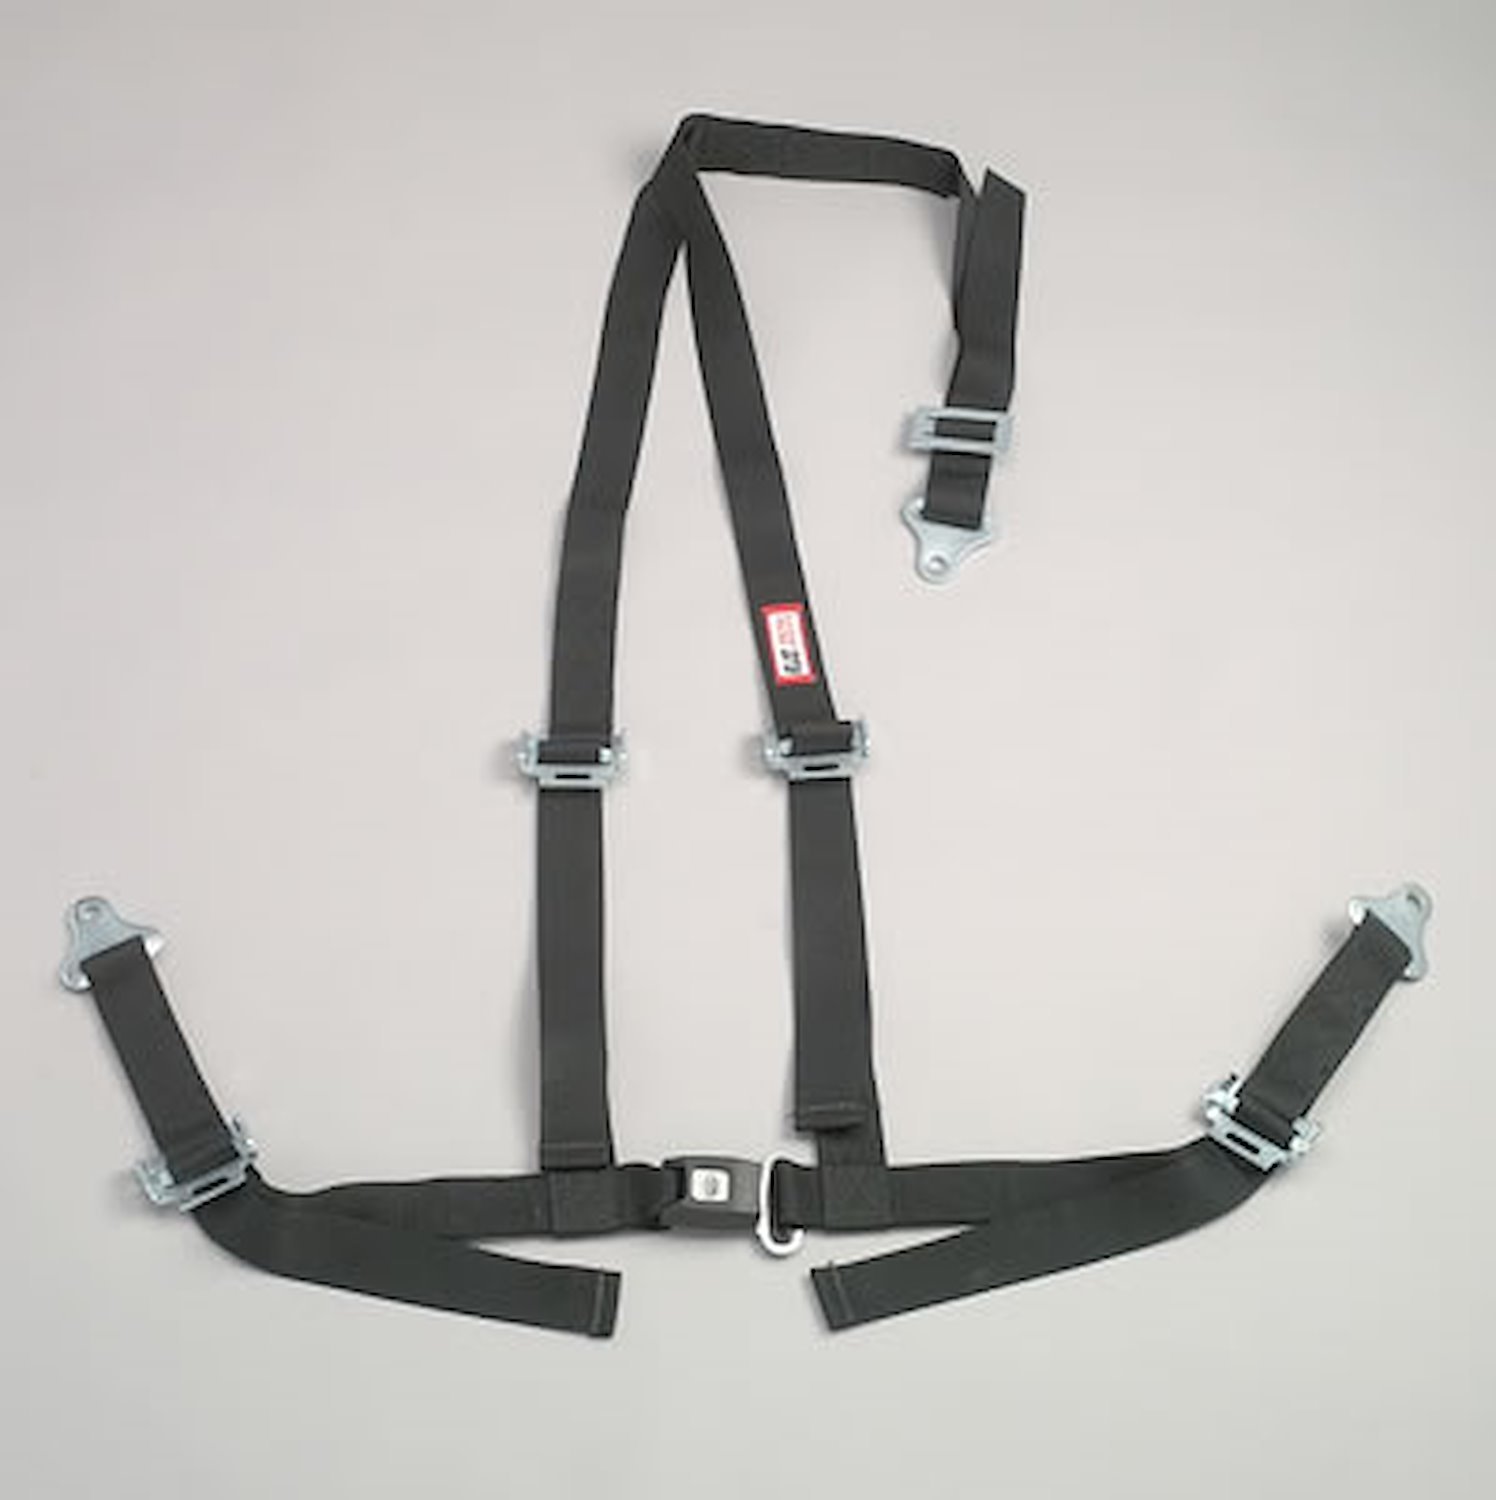 NON-SFI B&T HARNESS 2 PULL UP Lap Belt 2 S. H. Individual ROLL BAR Mount ALL WRAP ENDS YELLOW